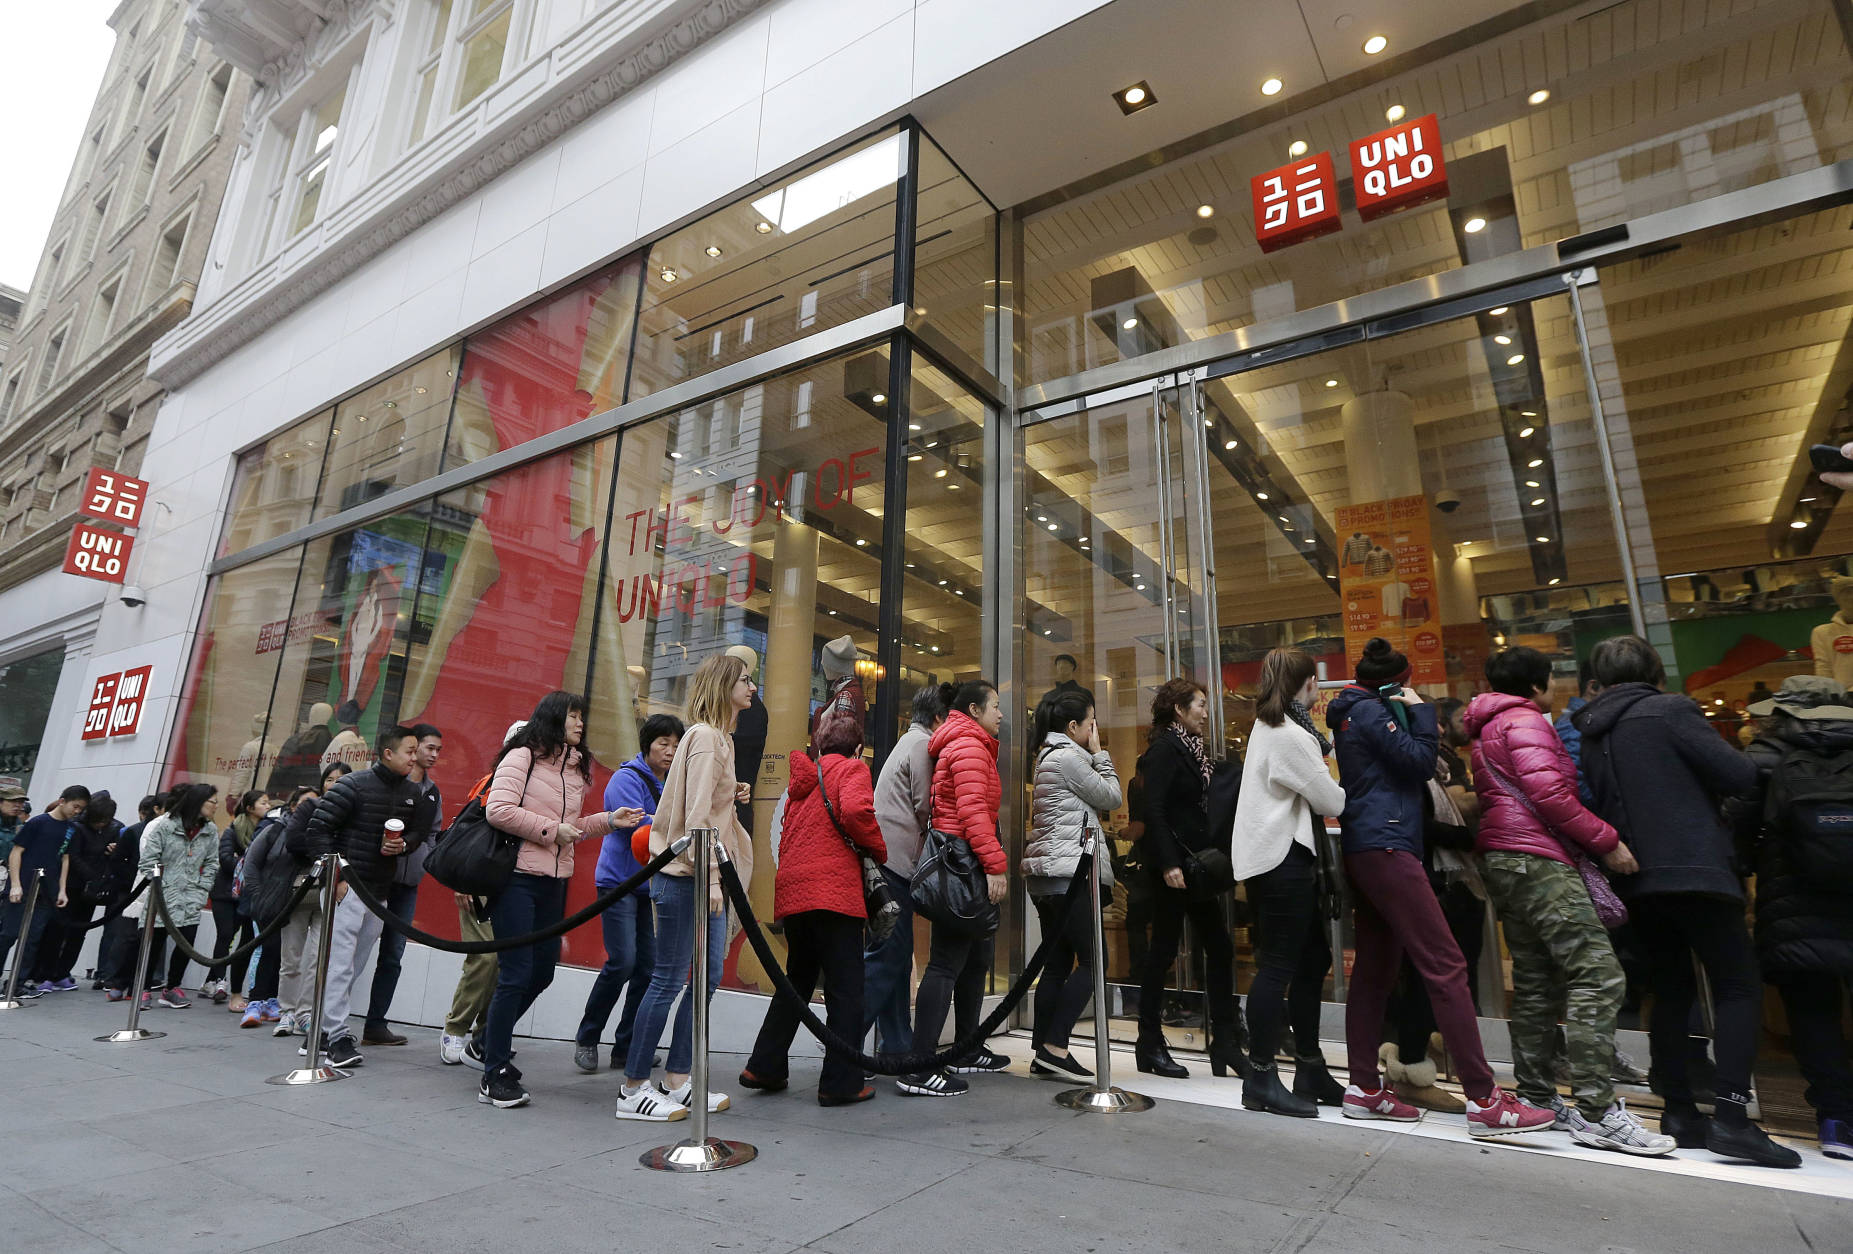 Shoppers wait in line to enter a Uniqlo store as it opens in San Francisco, Friday, Nov. 25, 2016. Black Friday, historically the starting line of the retail industry's crucial holiday buying season, isn't quite the one-day spree it used to be. Some retailers have pushed their biggest Black Friday door-buster deals into Thanksgiving Day and spread other promotions to even earlier in the season. (AP Photo/Jeff Chiu)